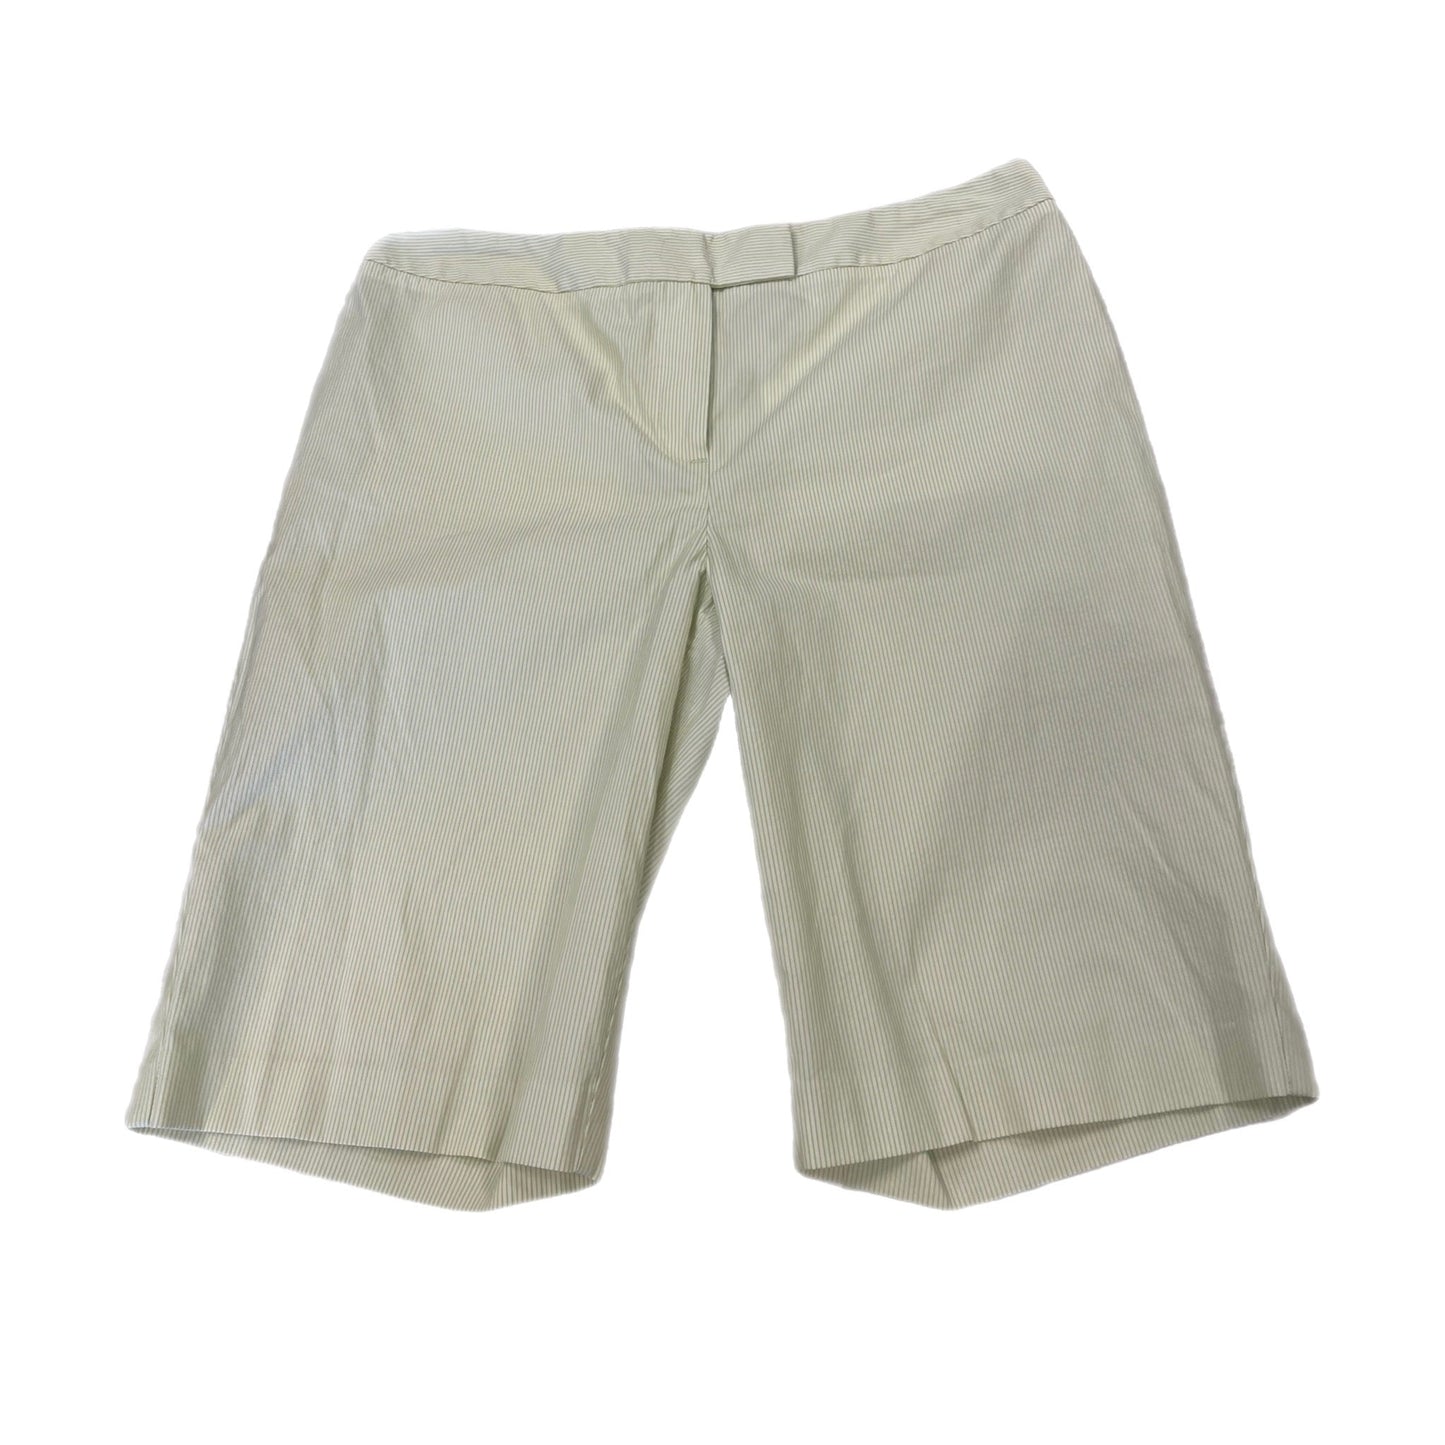 Shorts By Chicos  Size: 0.5 (size 6)